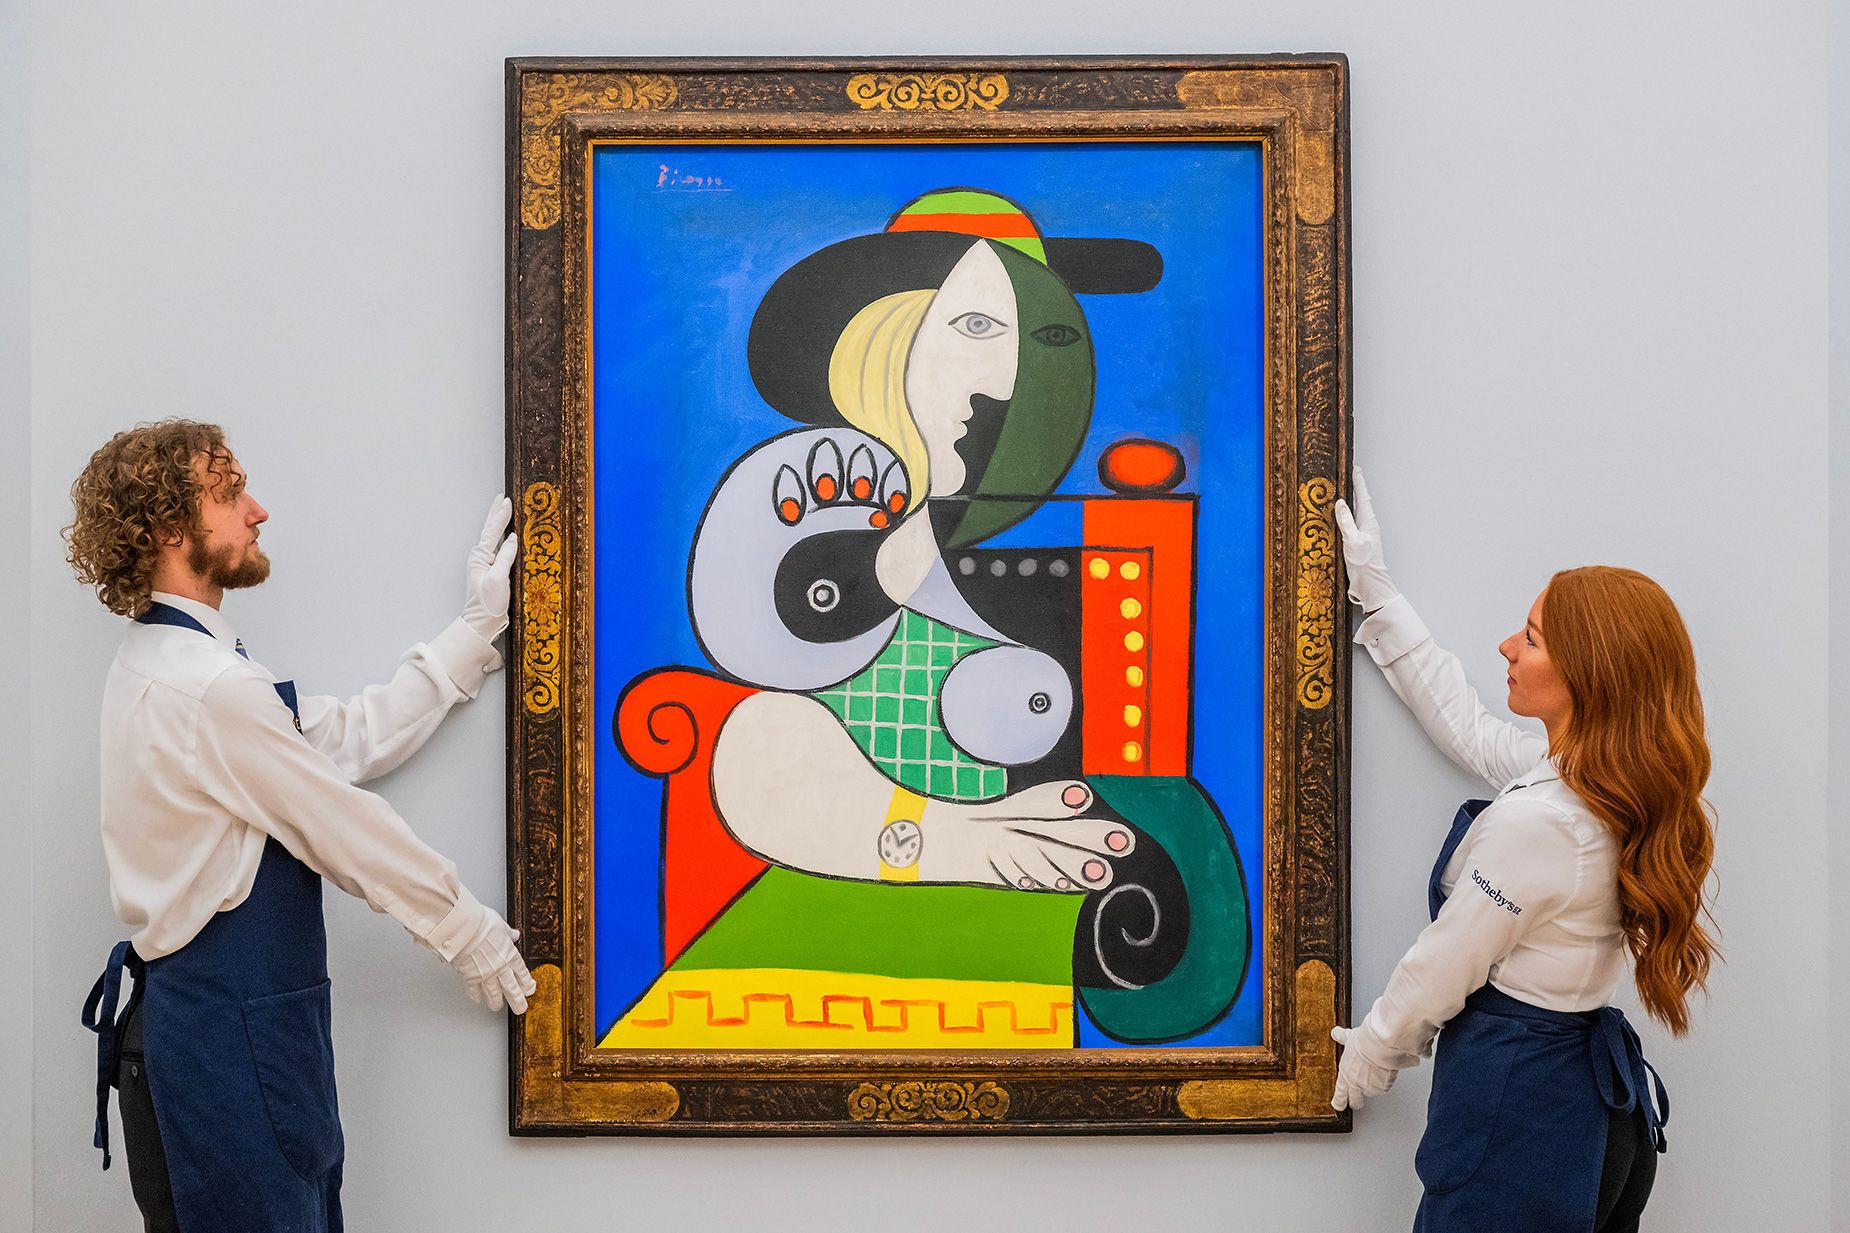 Pablo Picasso's 1932 masterpiece "Femme à la montre" was one of the year's big-ticket auction offerings.